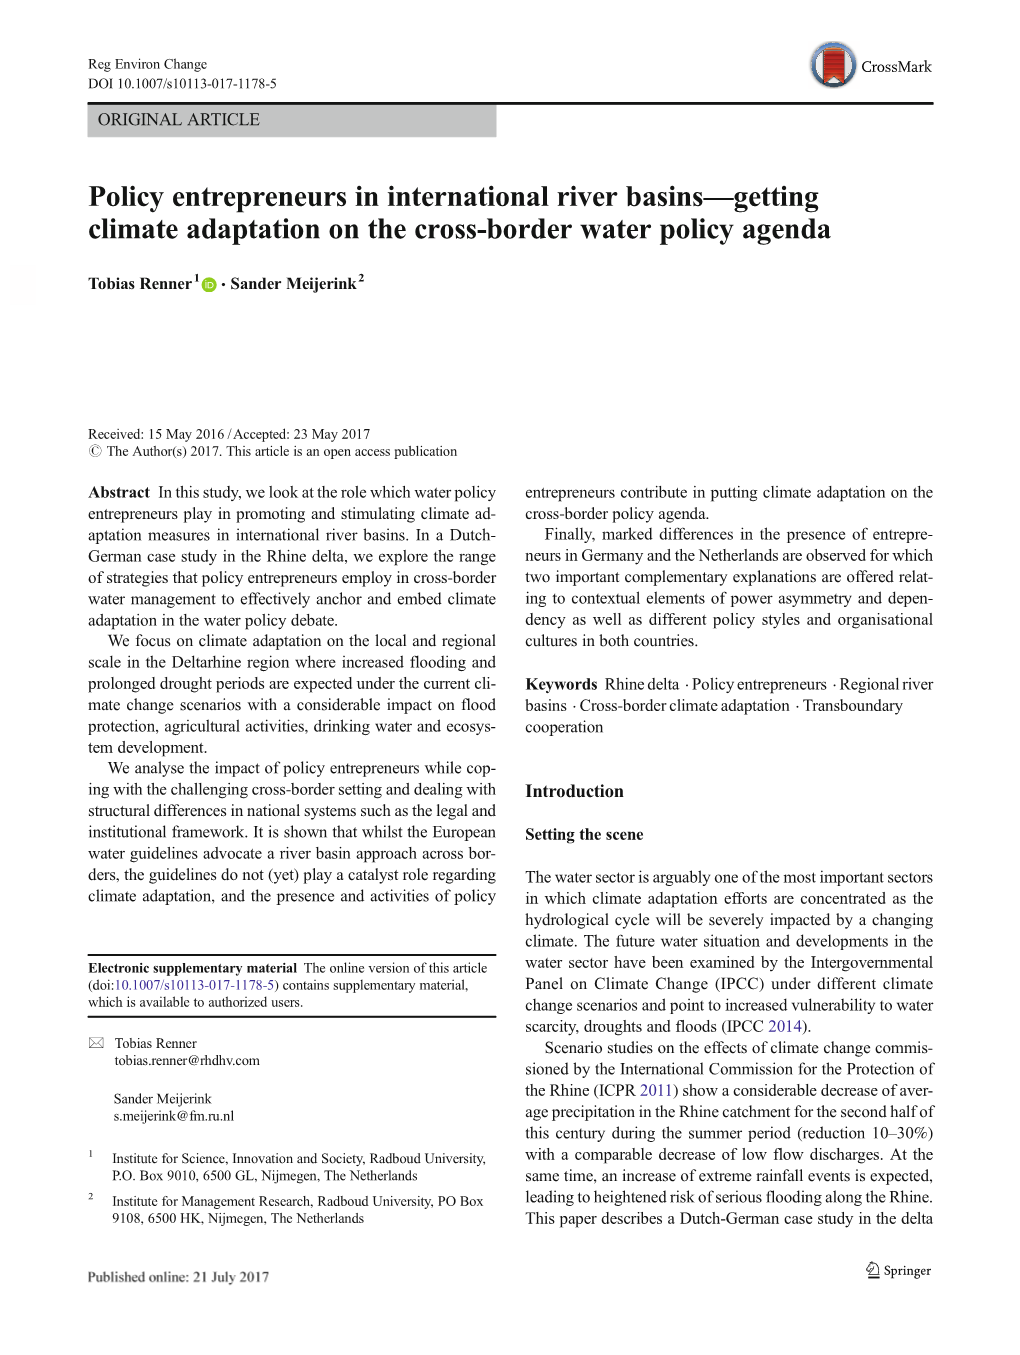 Policy Entrepreneurs in International River Basins—Getting Climate Adaptation on the Cross-Border Water Policy Agenda